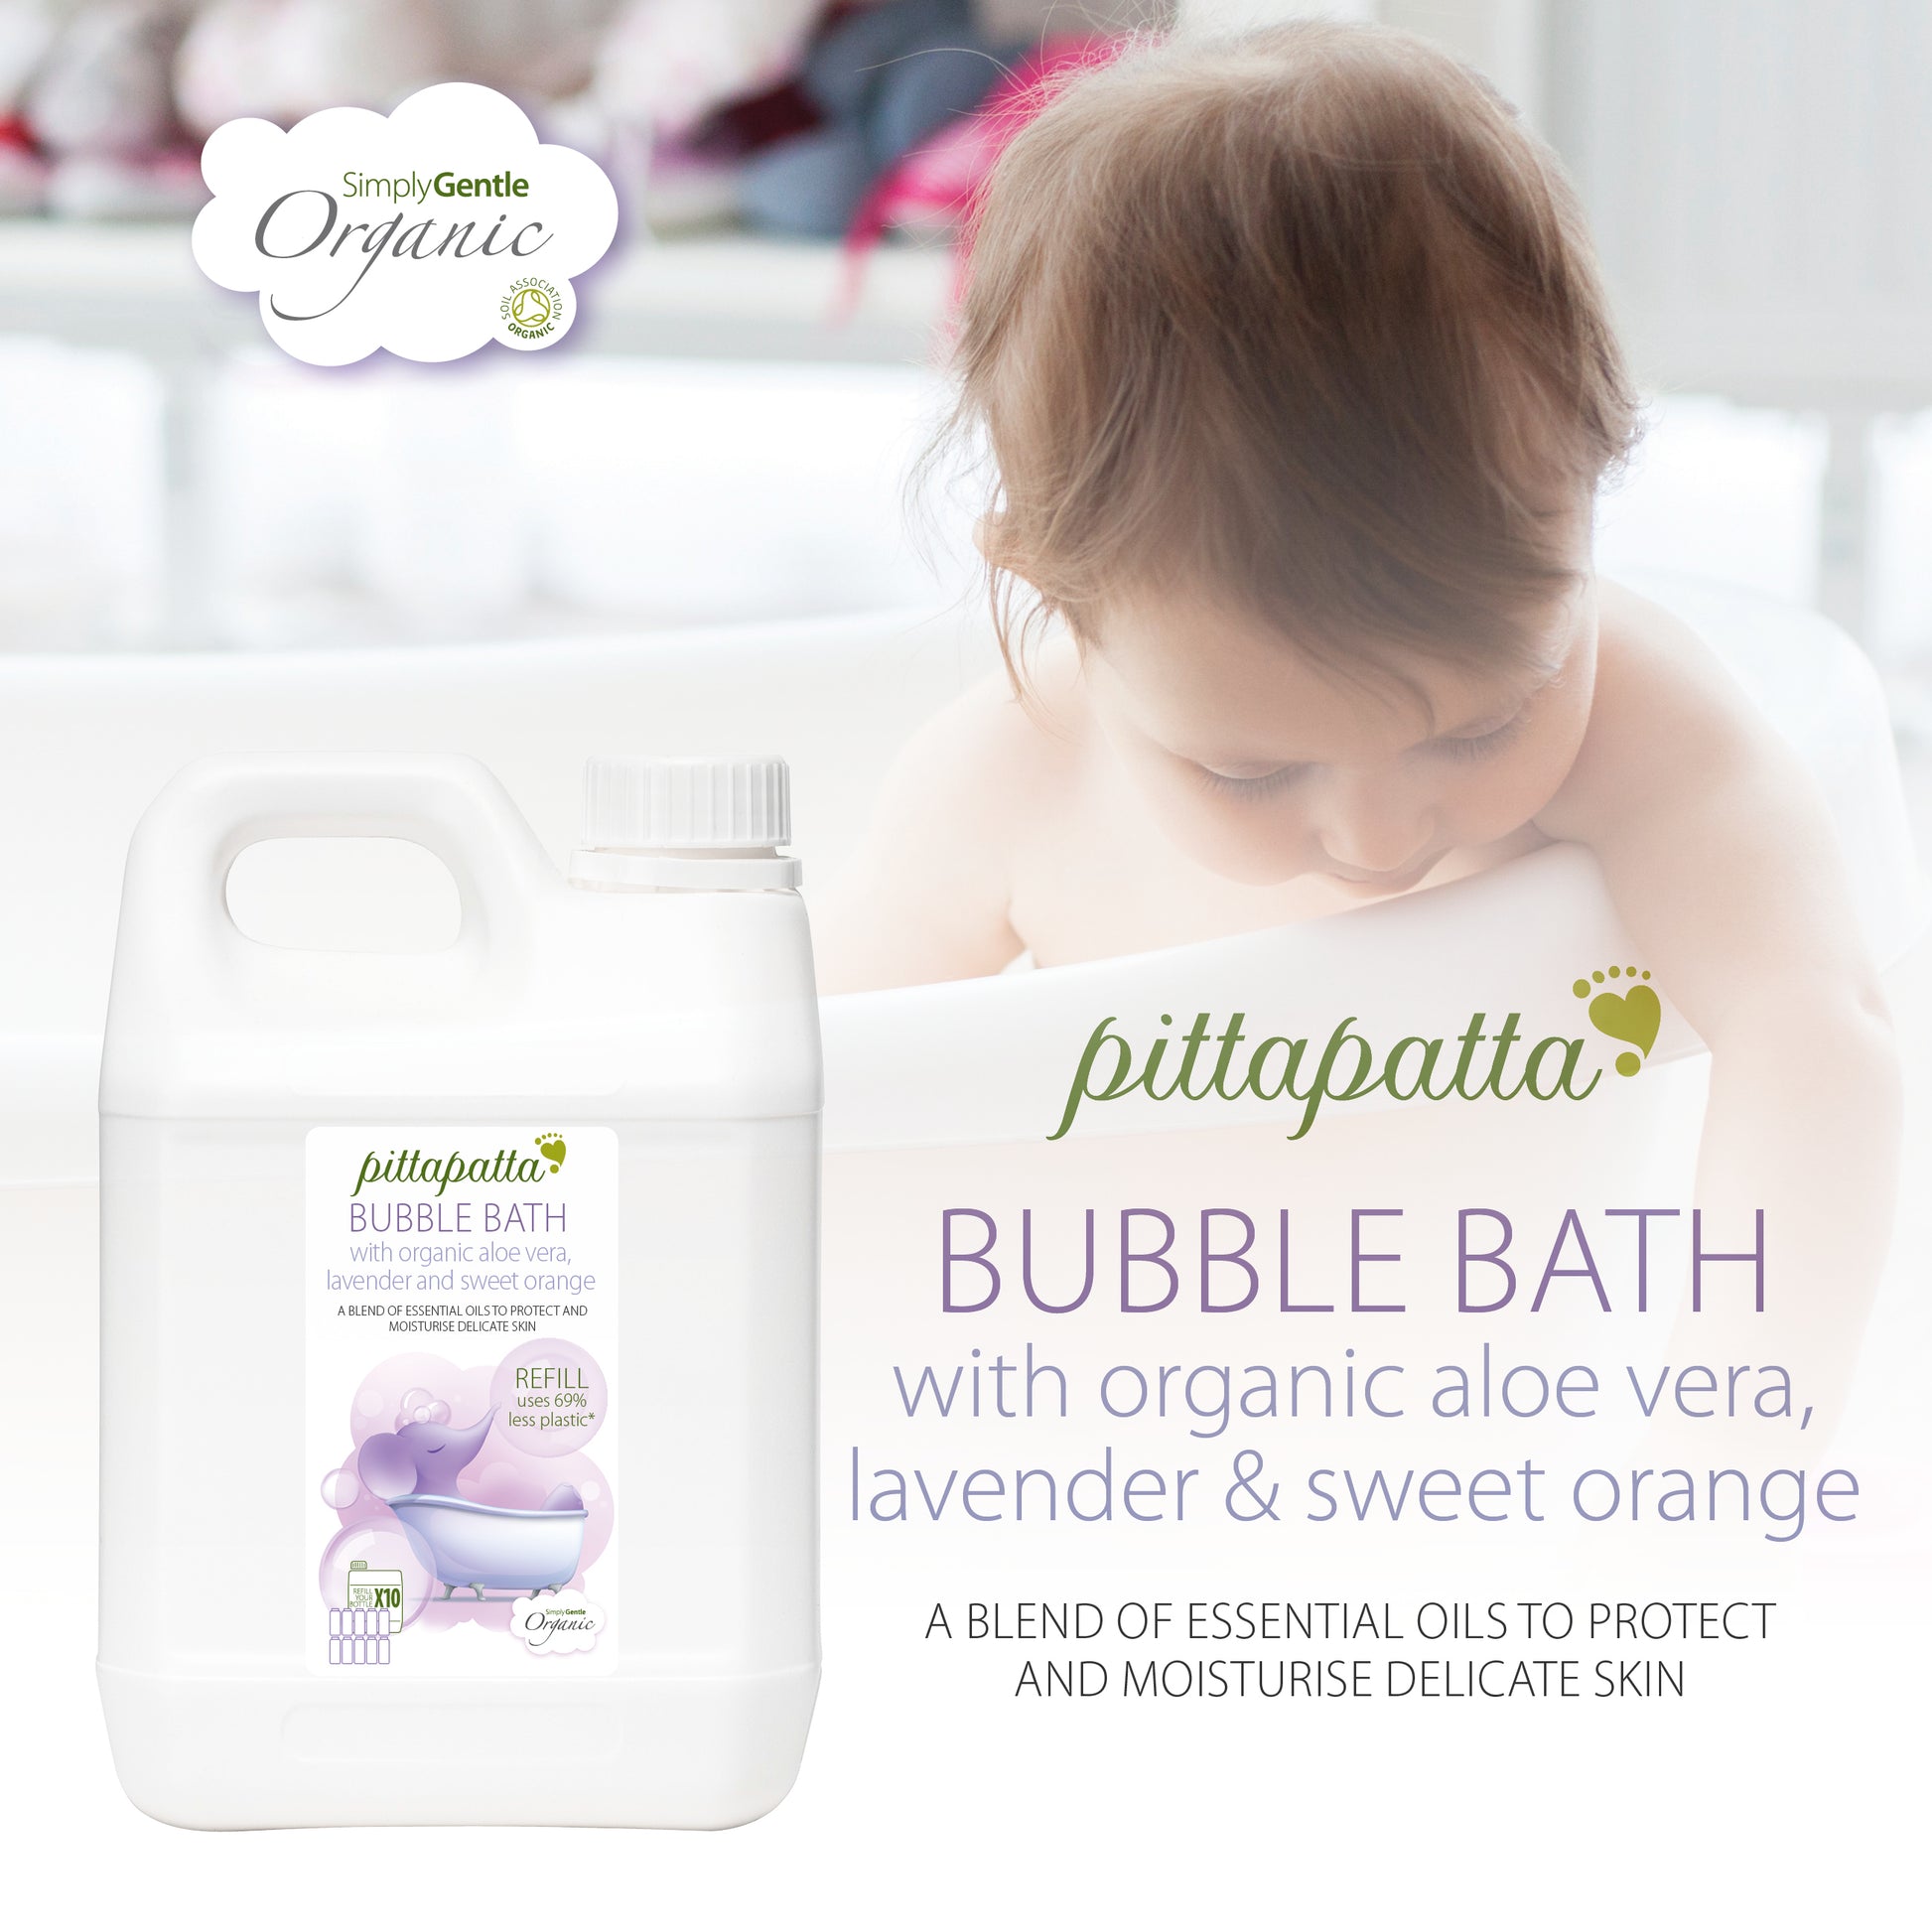 Pittapatta Bubble Bath is made with organic aloe vera, lavender and sweet orange. A blend of essential oils to protect and moisturise delicate skin.